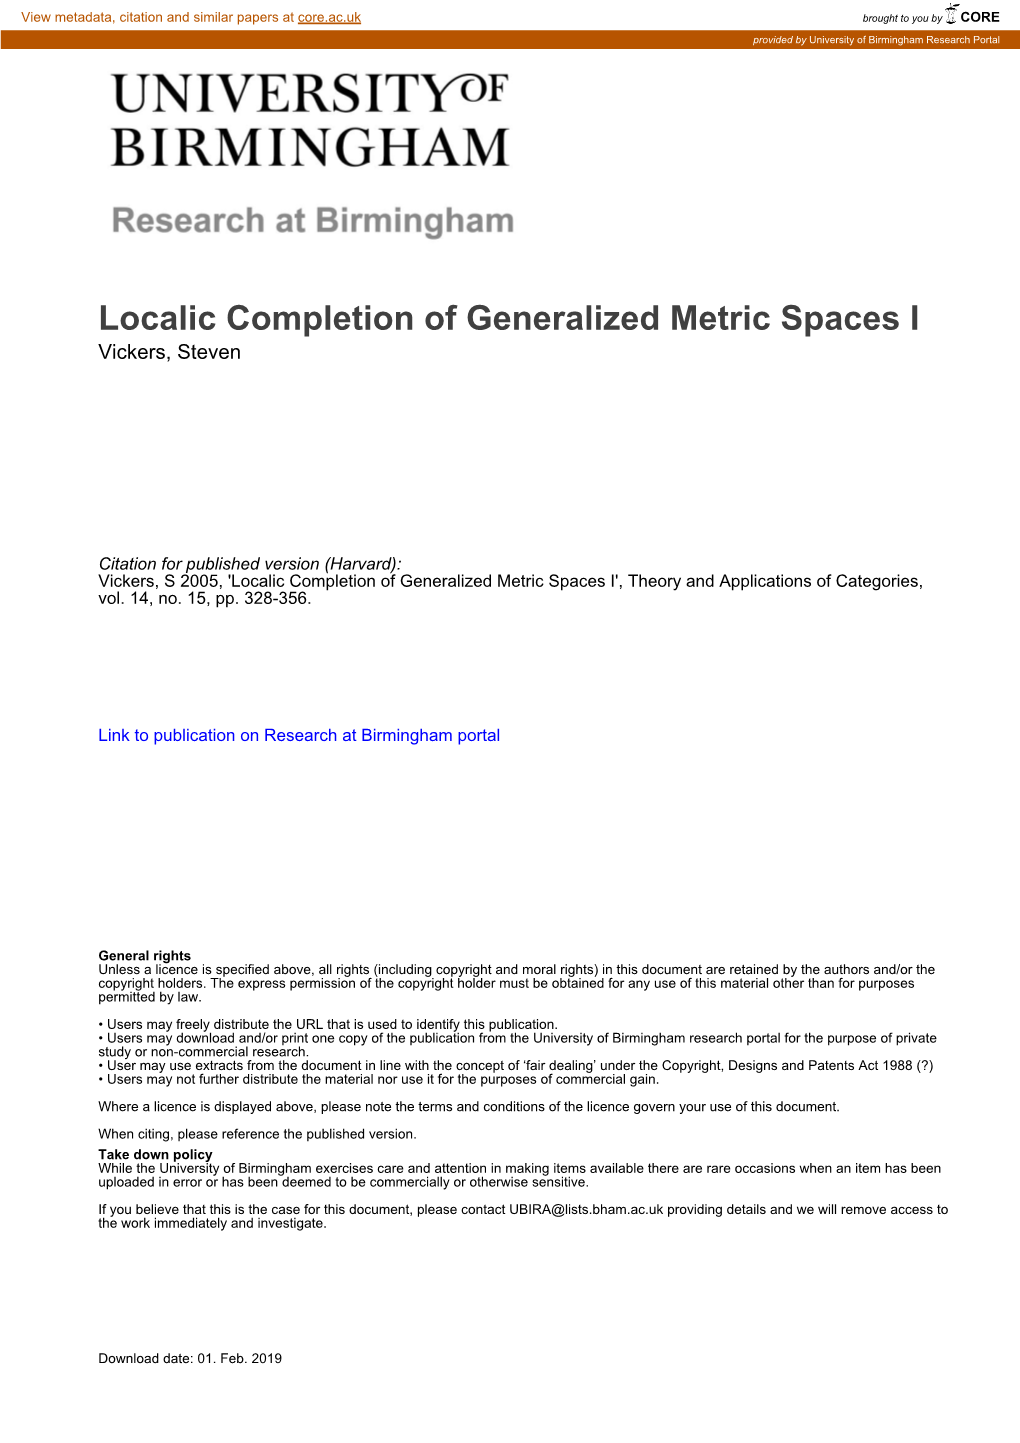 Localic Completion of Generalized Metric Spaces I Vickers, Steven